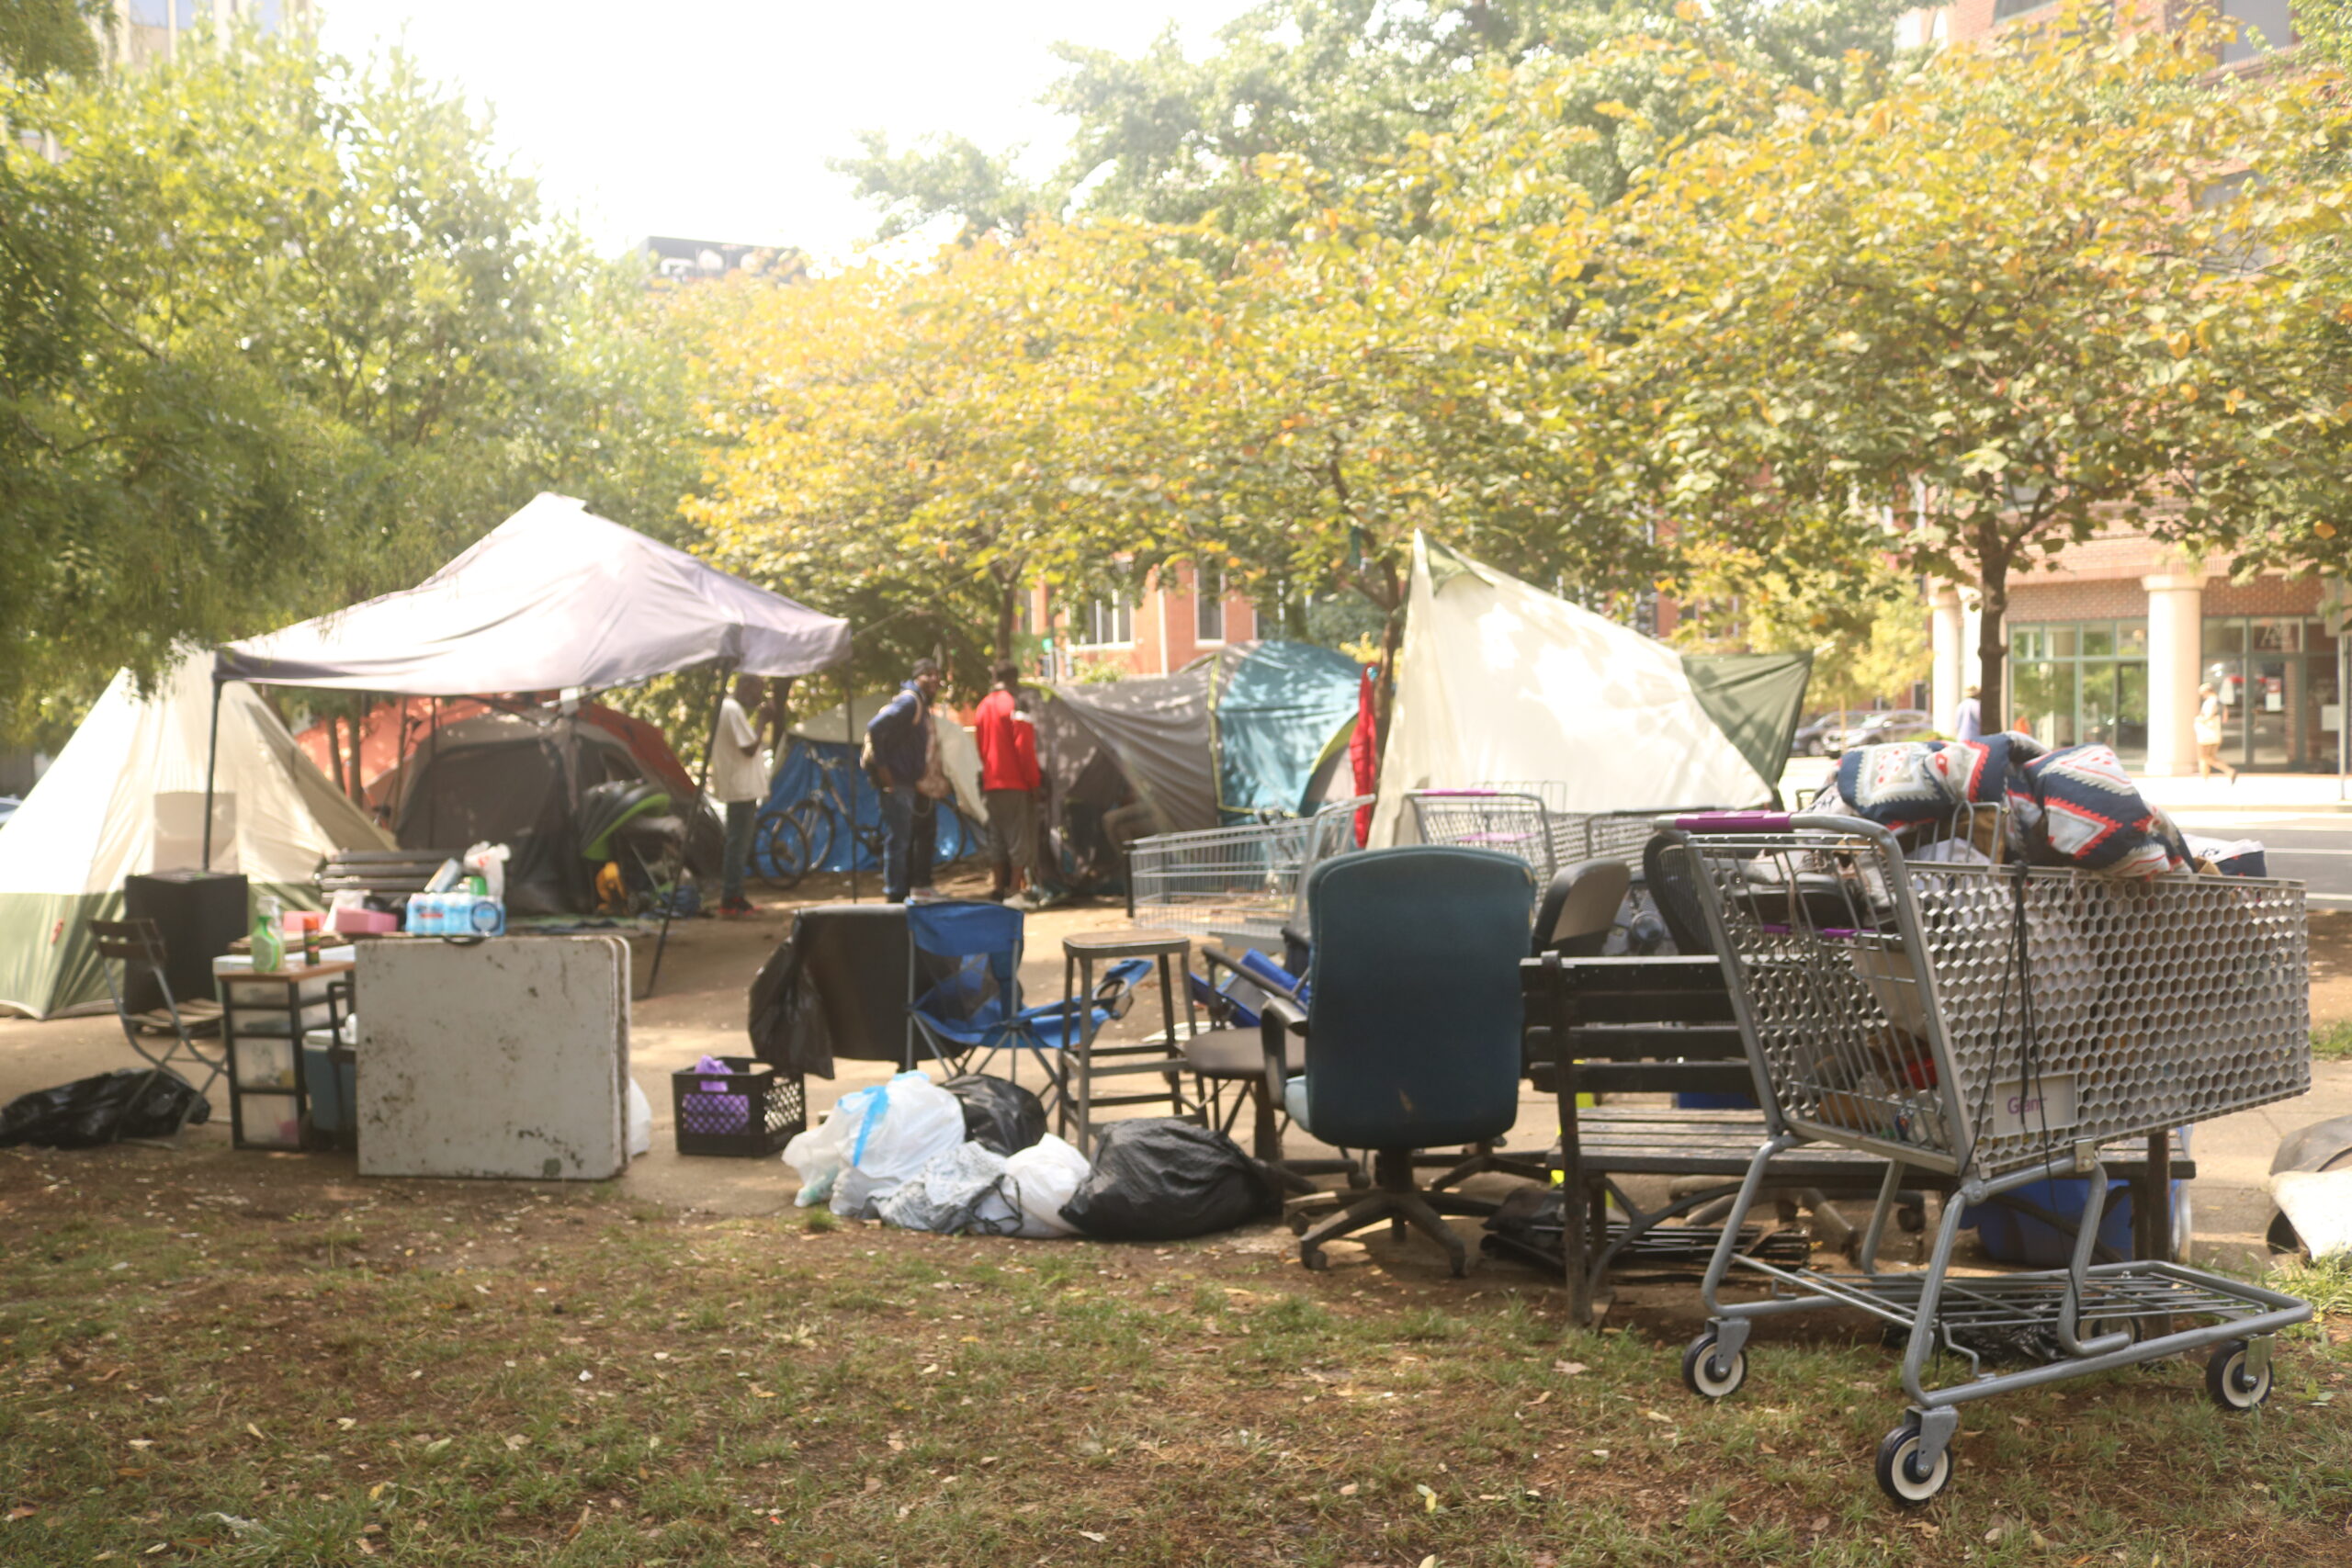 Photo of the community space set up by unsheltered residents at Burke and Gompers parks.